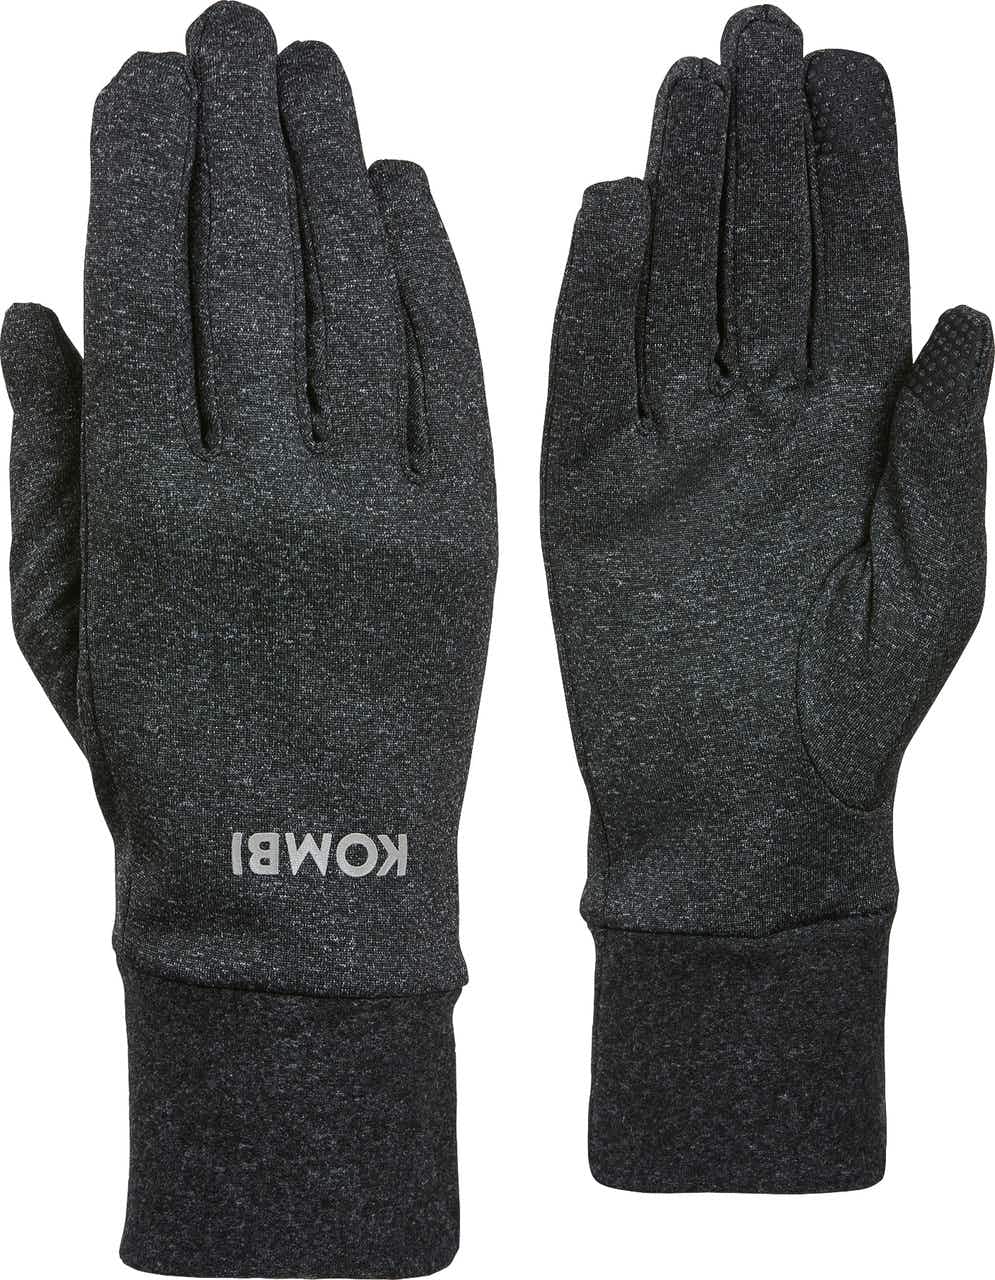 P3 Touch Screen Liner Gloves Heather Charcoal